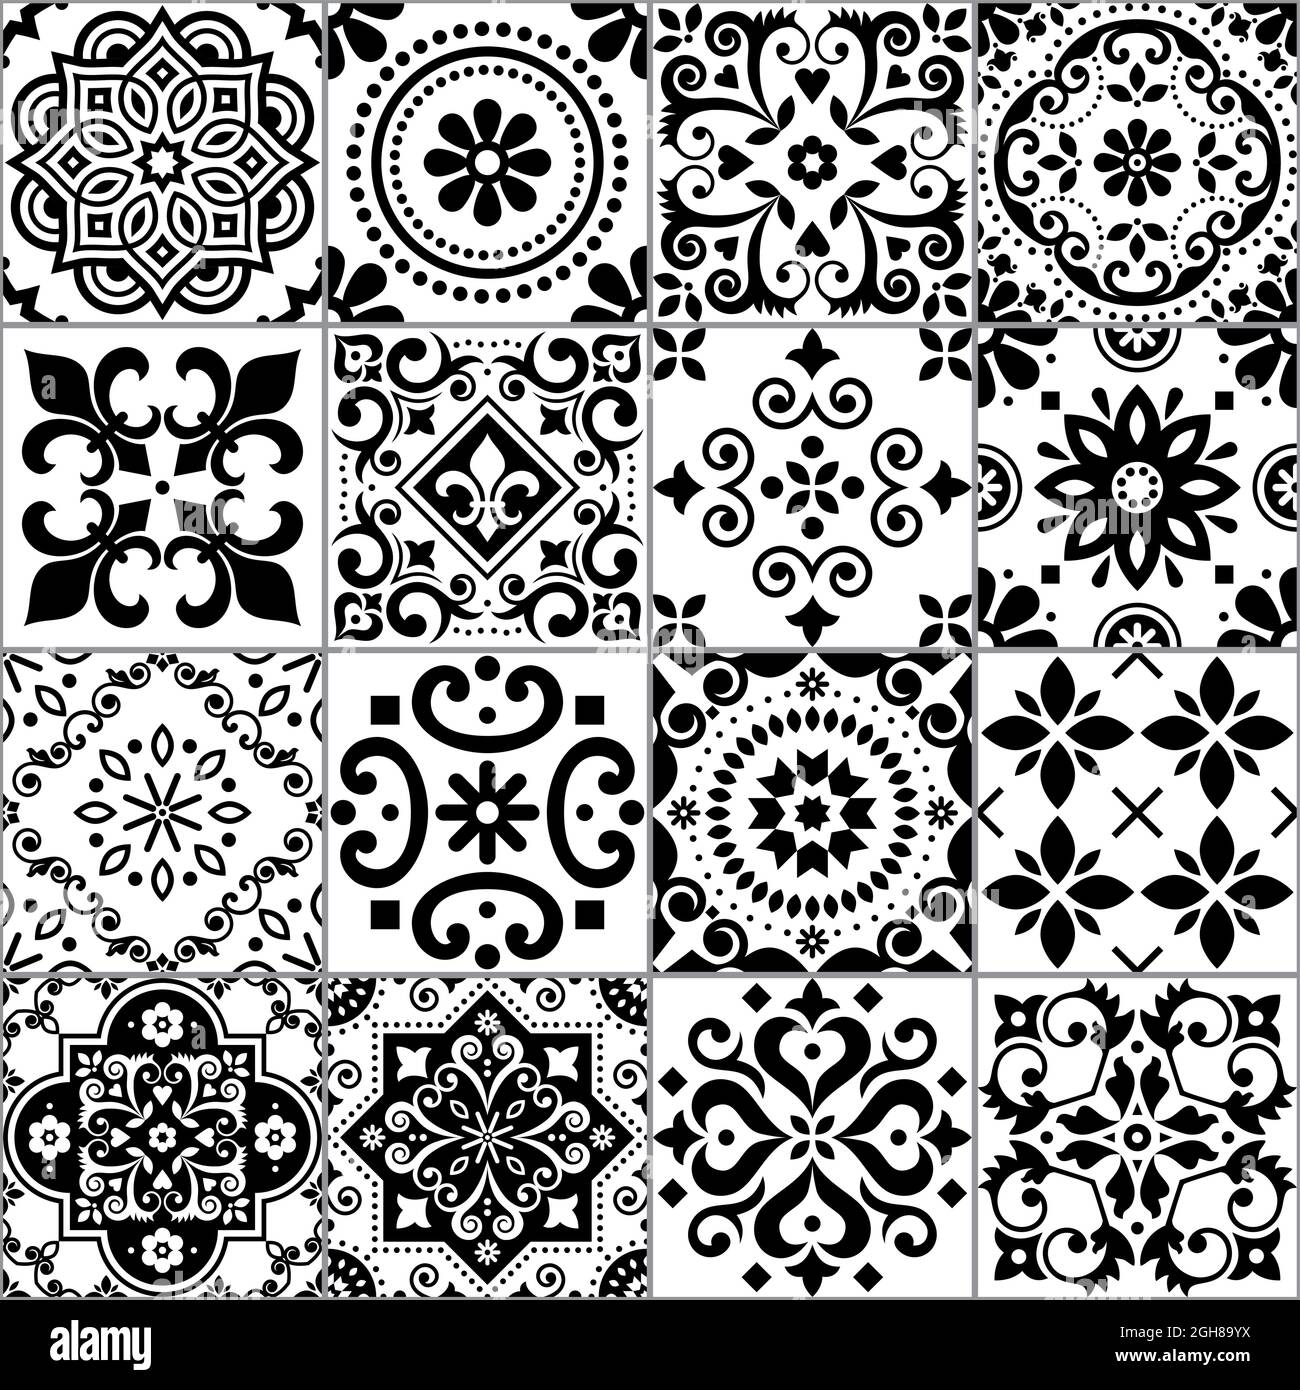 Portuguese and Spanish azulejo tiles seamless vector pattern collection in black on white, traditional floral design big set inspired by tile art from Stock Vector